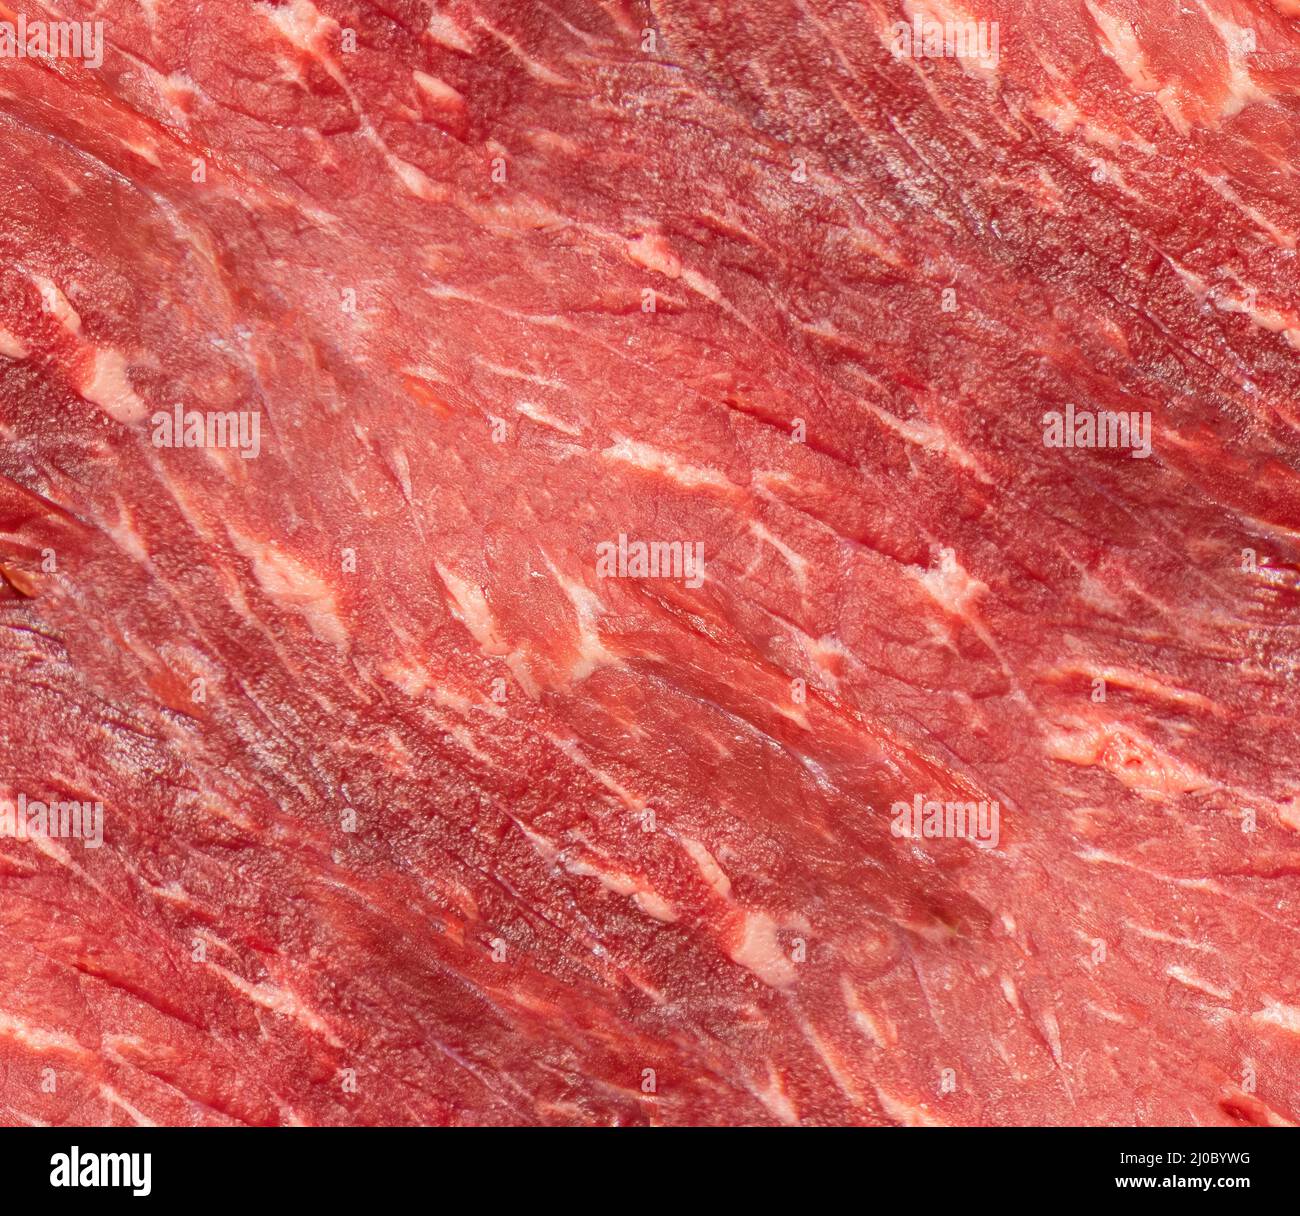 https://c8.alamy.com/comp/2J0BYWG/seamless-fresh-meat-background-raw-uncooked-red-beef-meat-texture-closeup-pattern-2J0BYWG.jpg